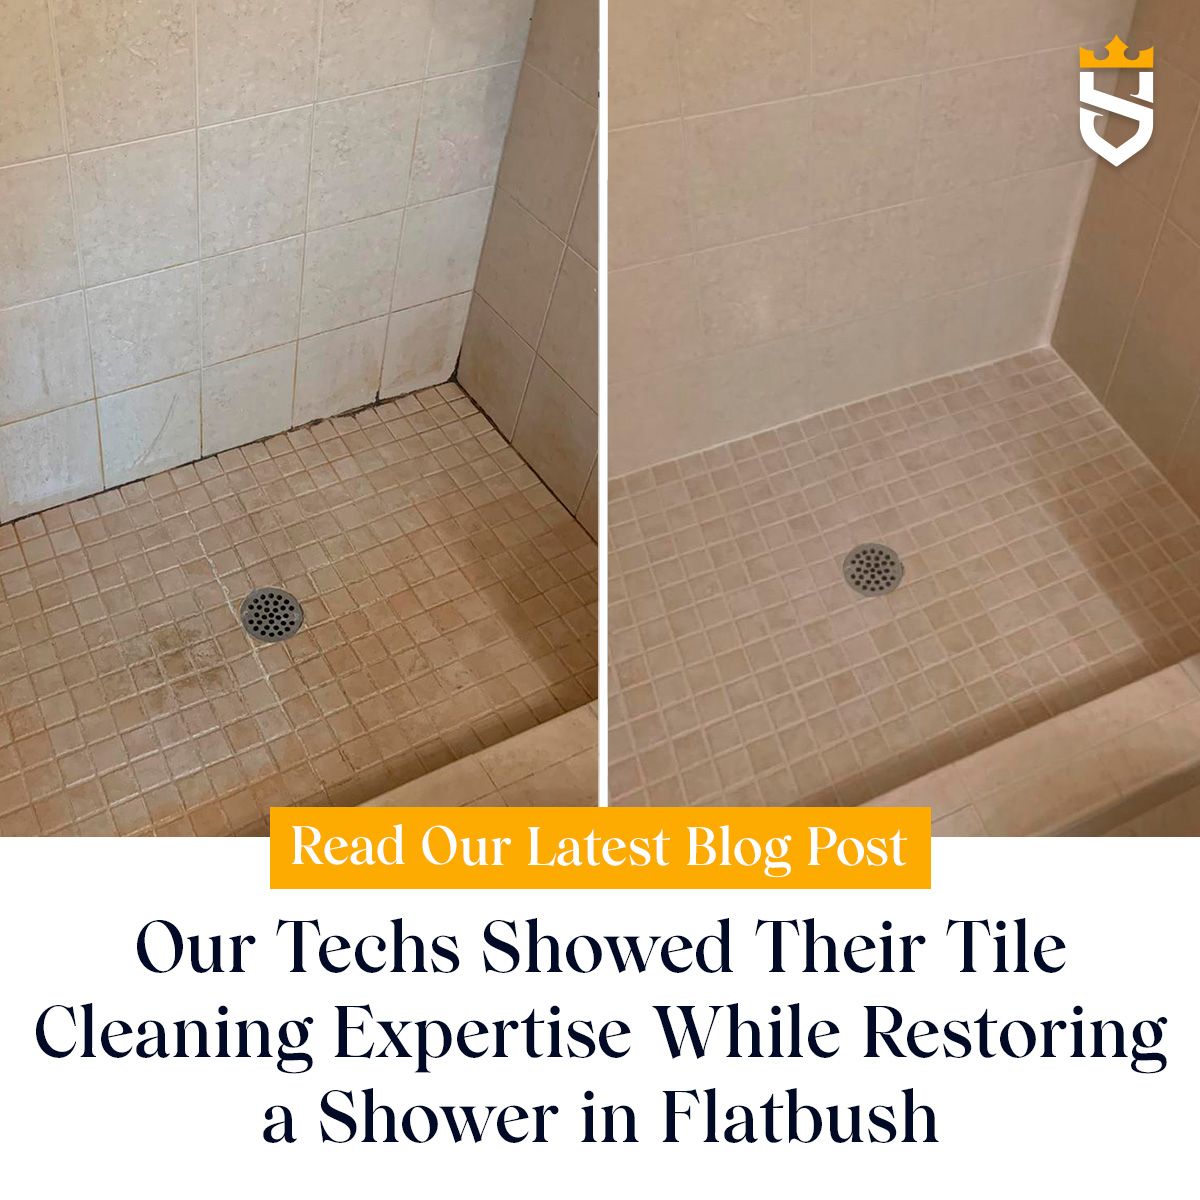 Our Techs Showed Their Tile Cleaning Expertise While Restoring a Shower in Flatbush